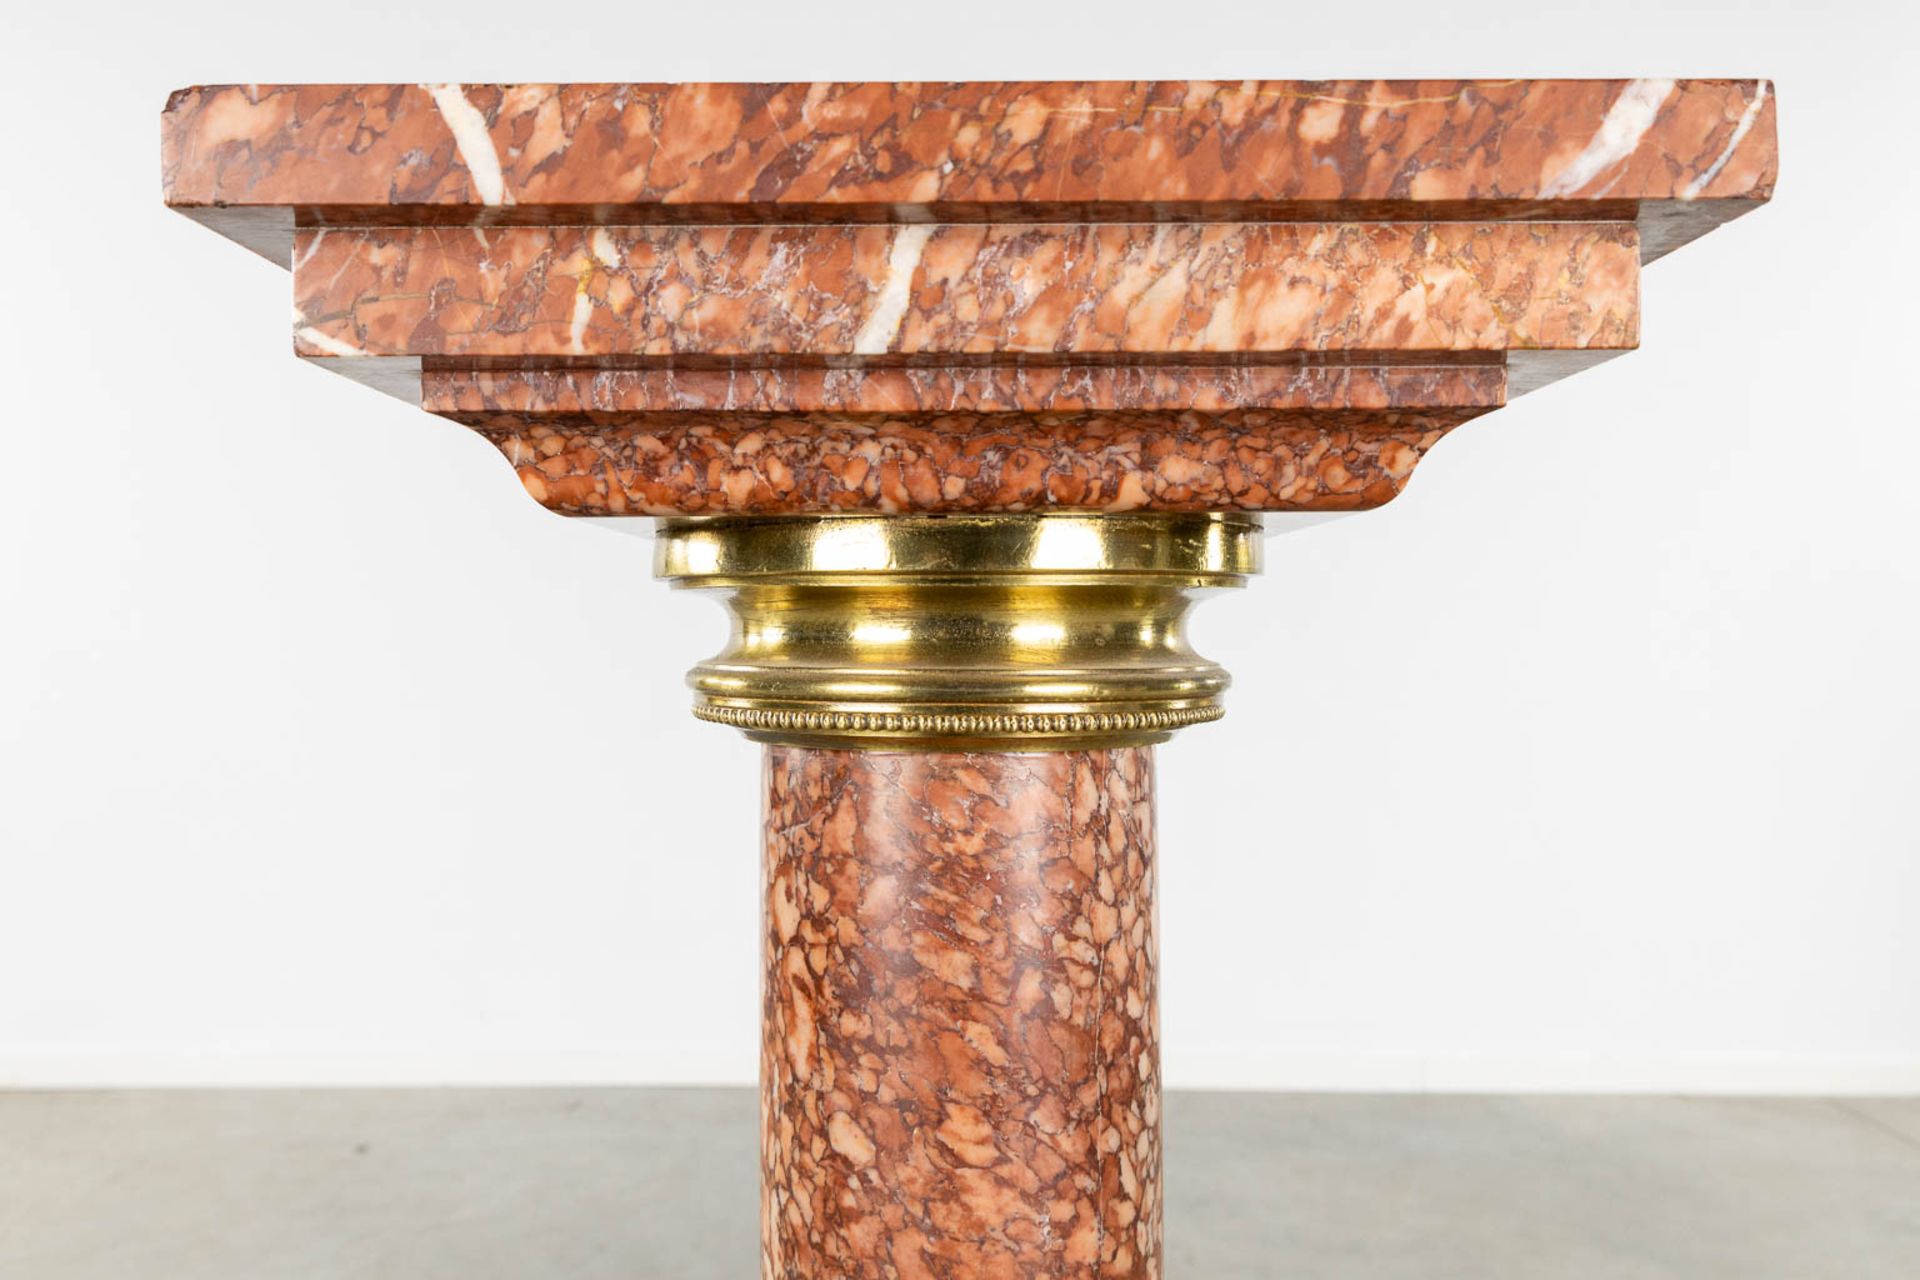 An antique sculptured red marble pedestal, mounted with bronze. Circa 1900. (L:30 x W:30 x H:103 cm) - Image 5 of 7